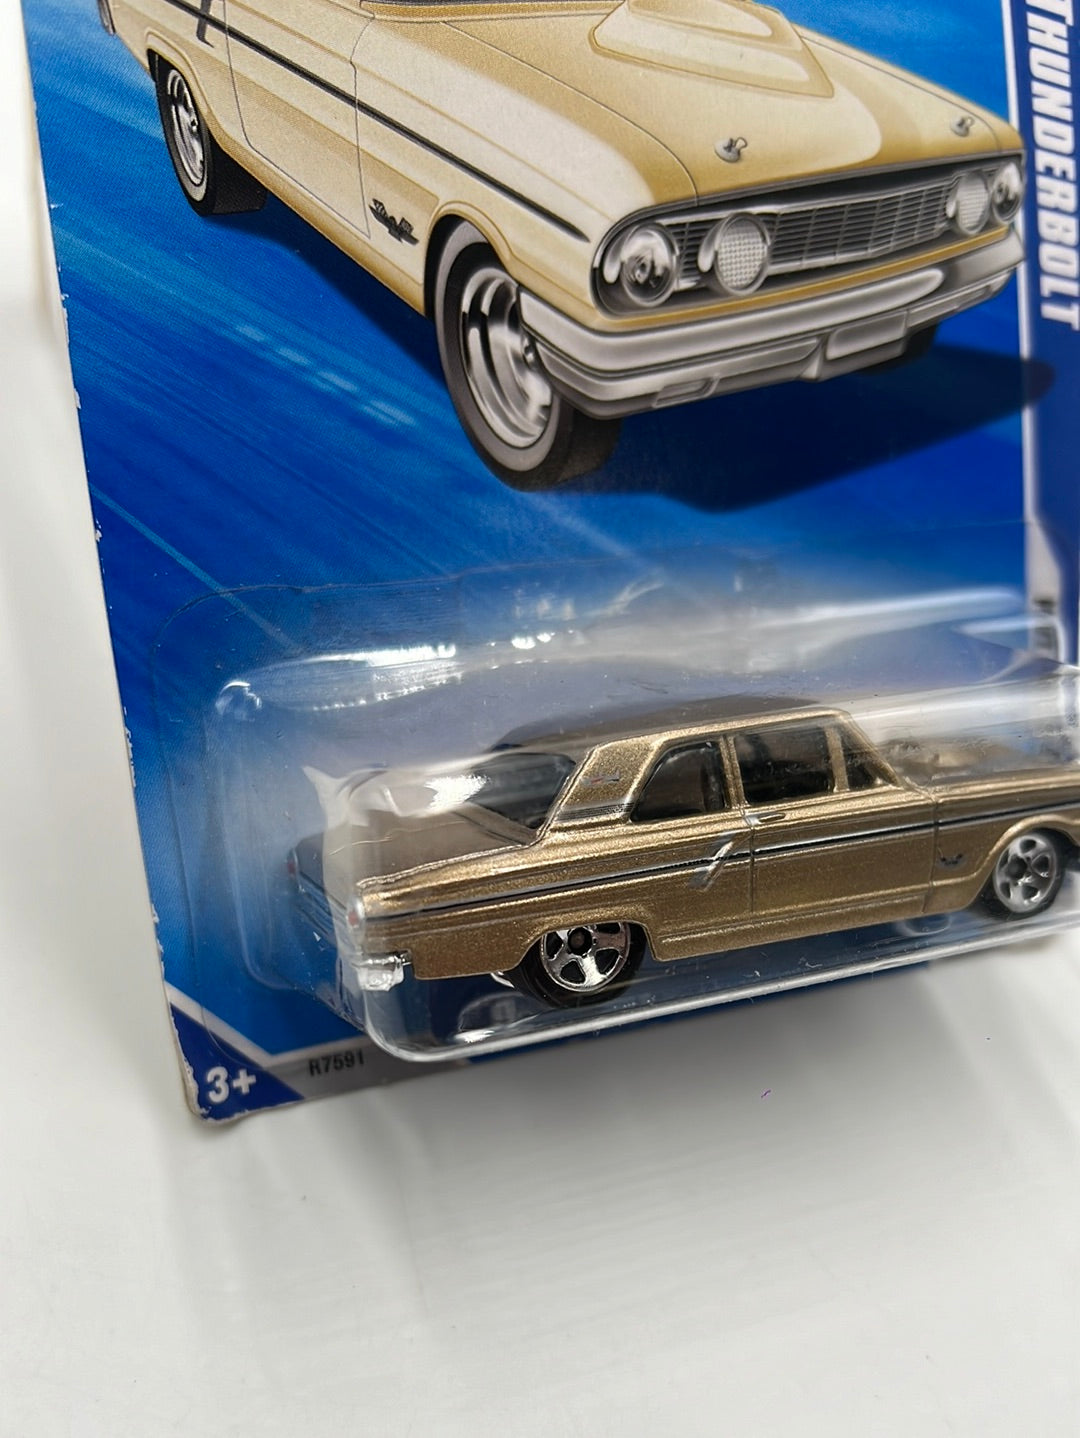 2010 Hot Wheels Hot Auction Ford Thunderbolt Gold Kmart Exclusive 166/240 237B